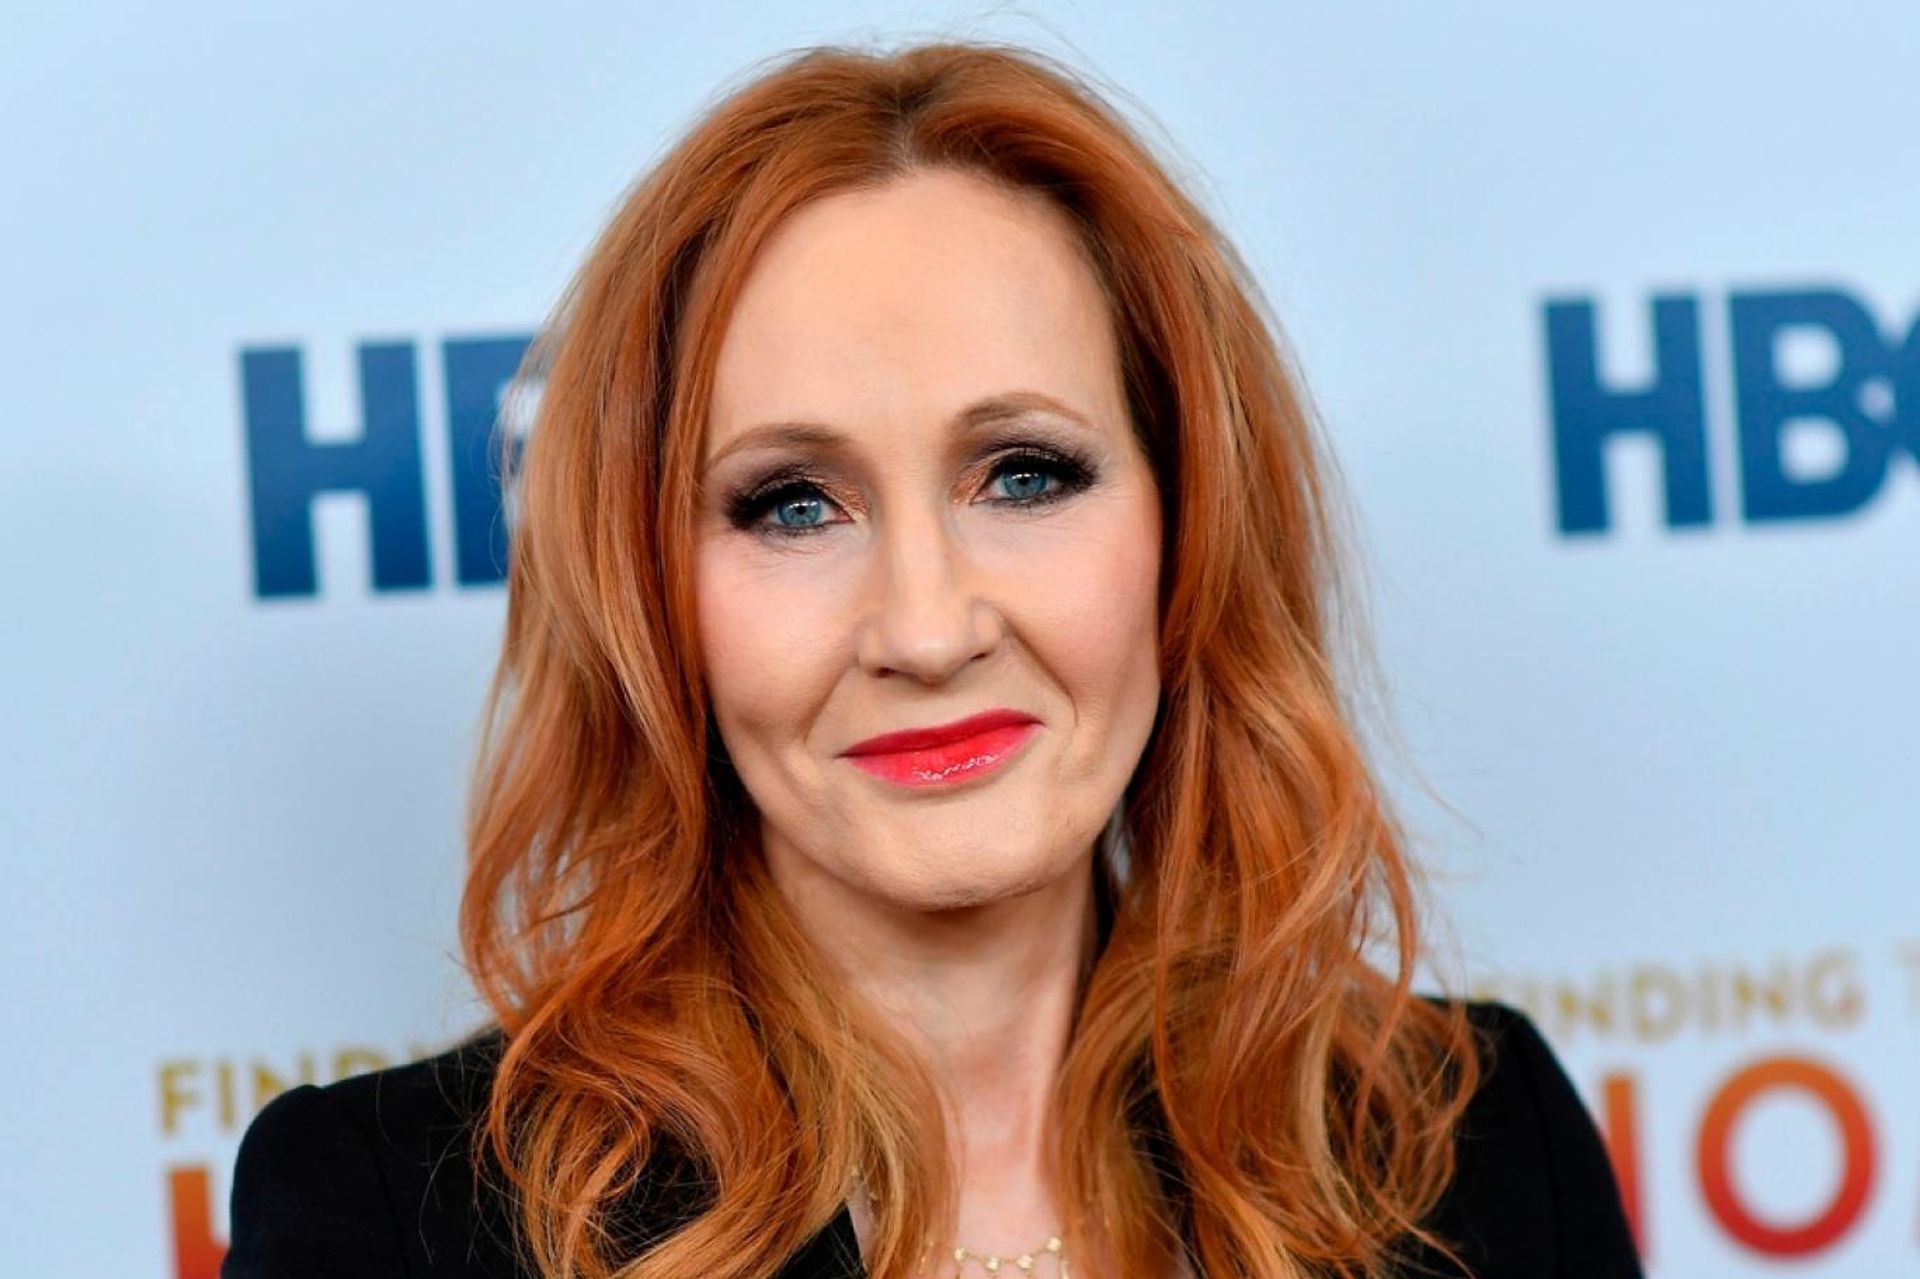 Rowling to produce Harry Potter TV series for HBO Max